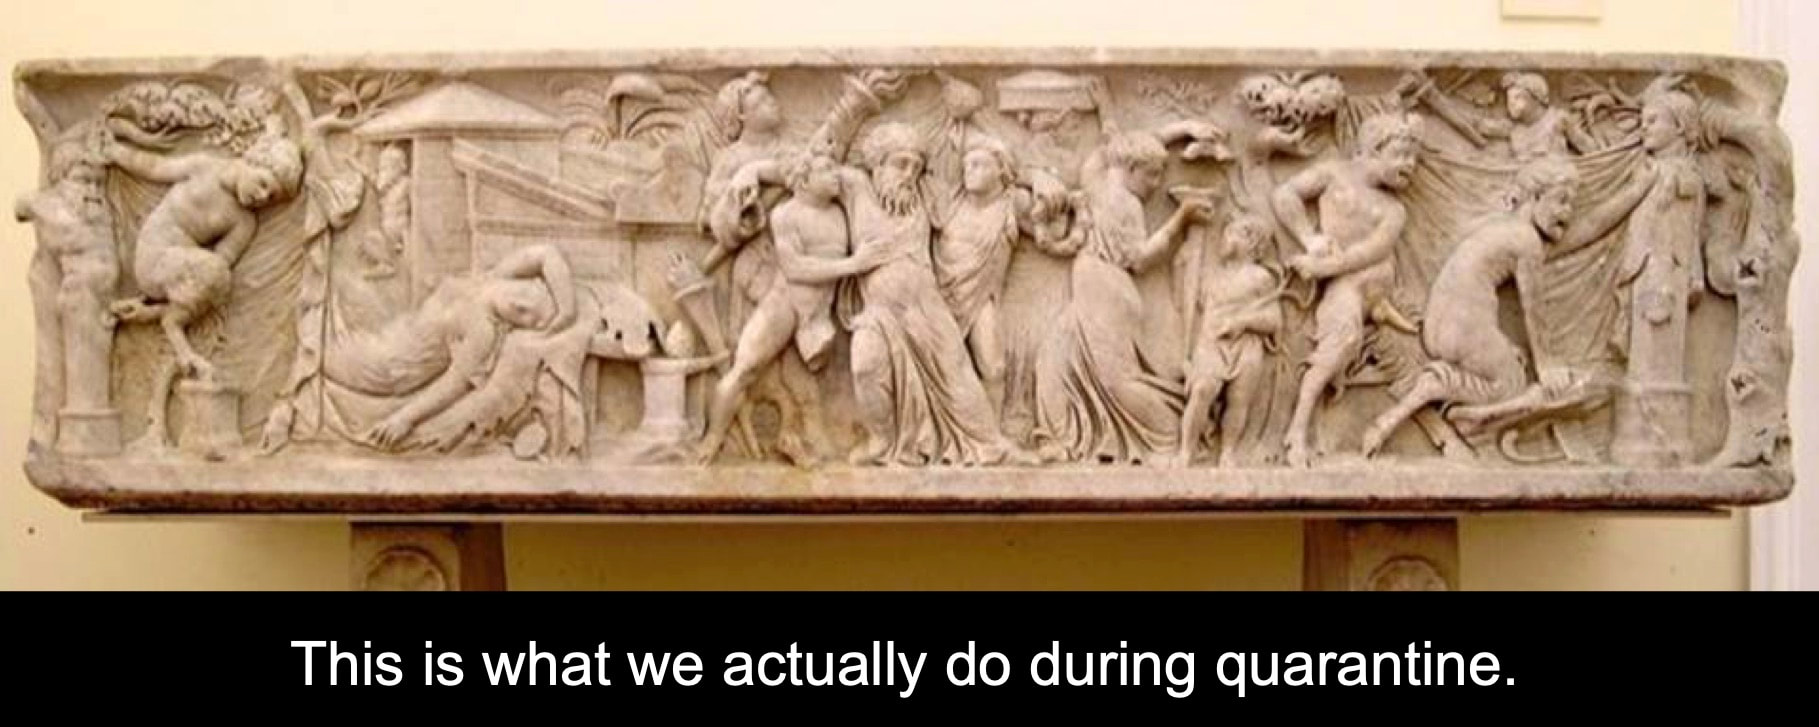 Sarcophagus showing a night-time celebration with young Pans (Fauns) and female Pans; at center, Priapus, god of the erect penis, drunk.  Ca. 150 AD.  Naples Archaeological Museum, Naples.  Meme by Hoseok Youn.